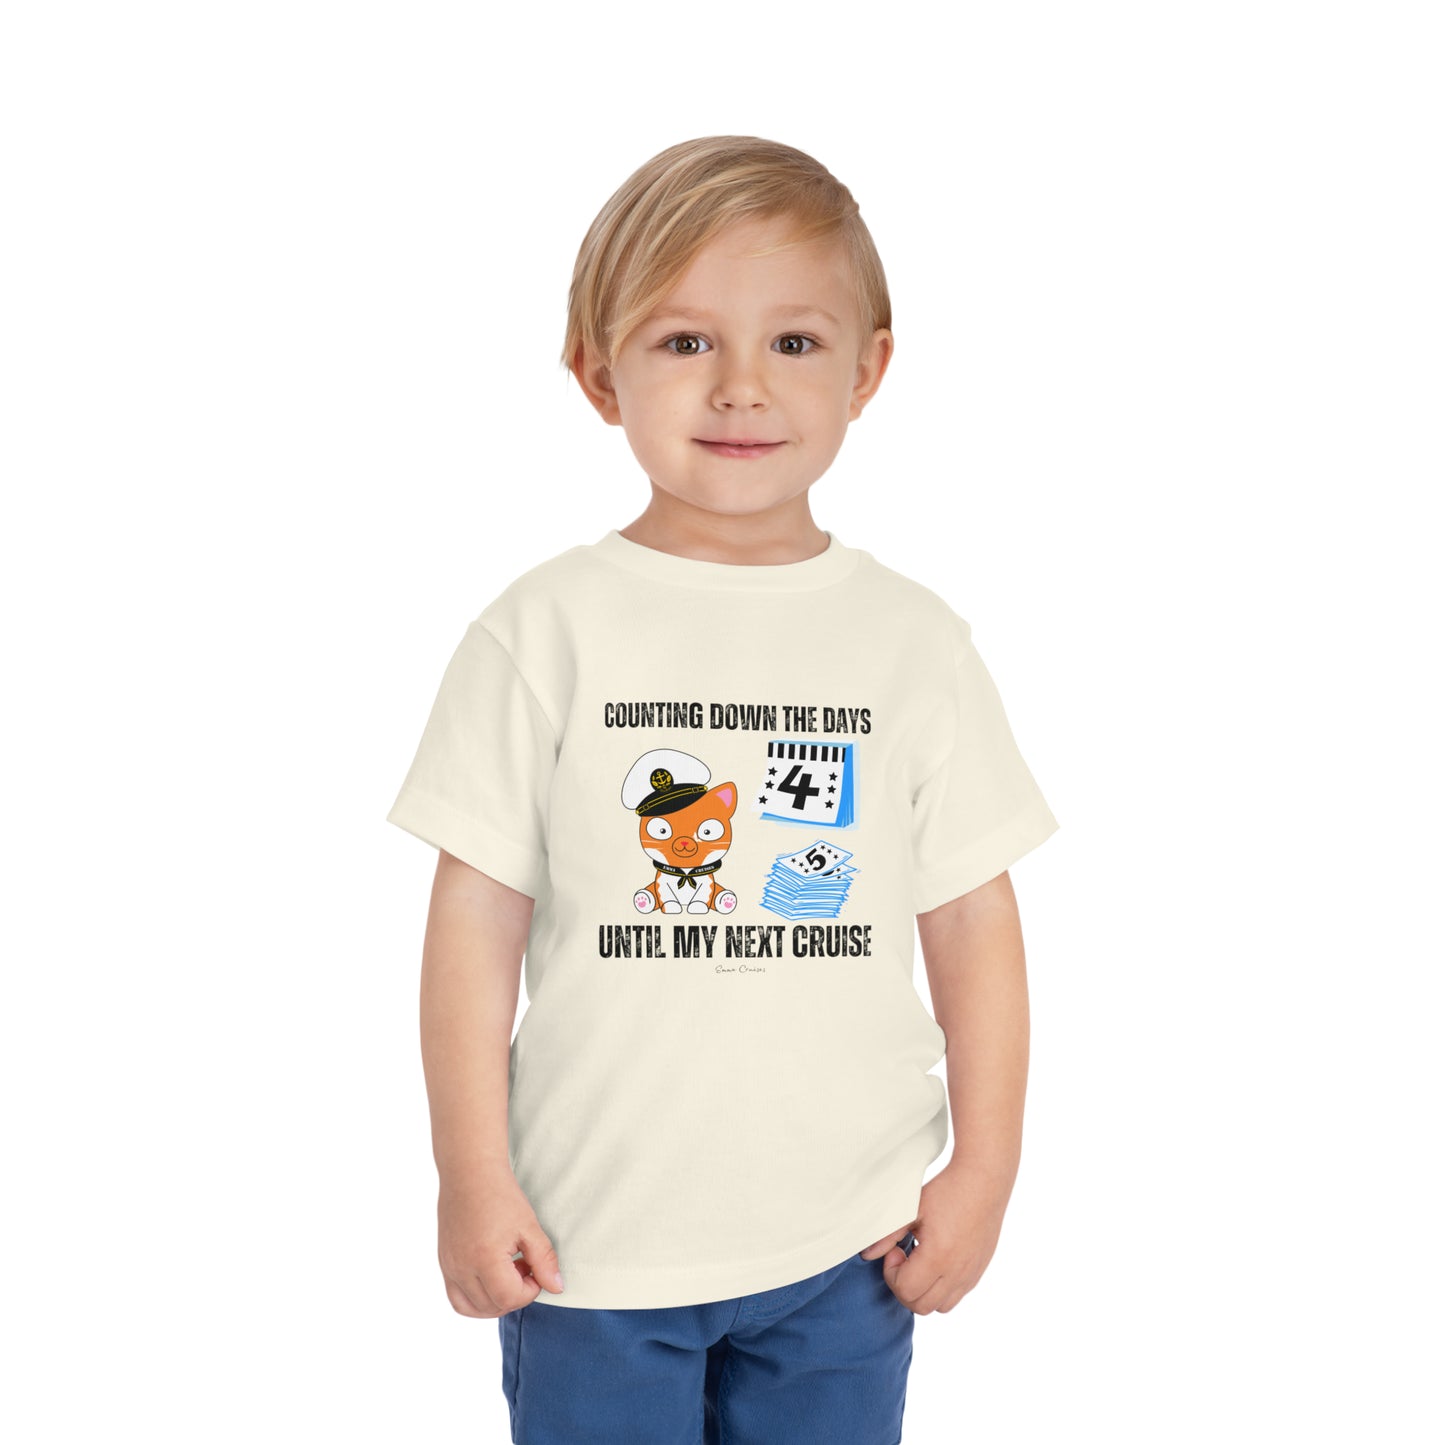 Counting Down the Days - Toddler UNISEX T-Shirt